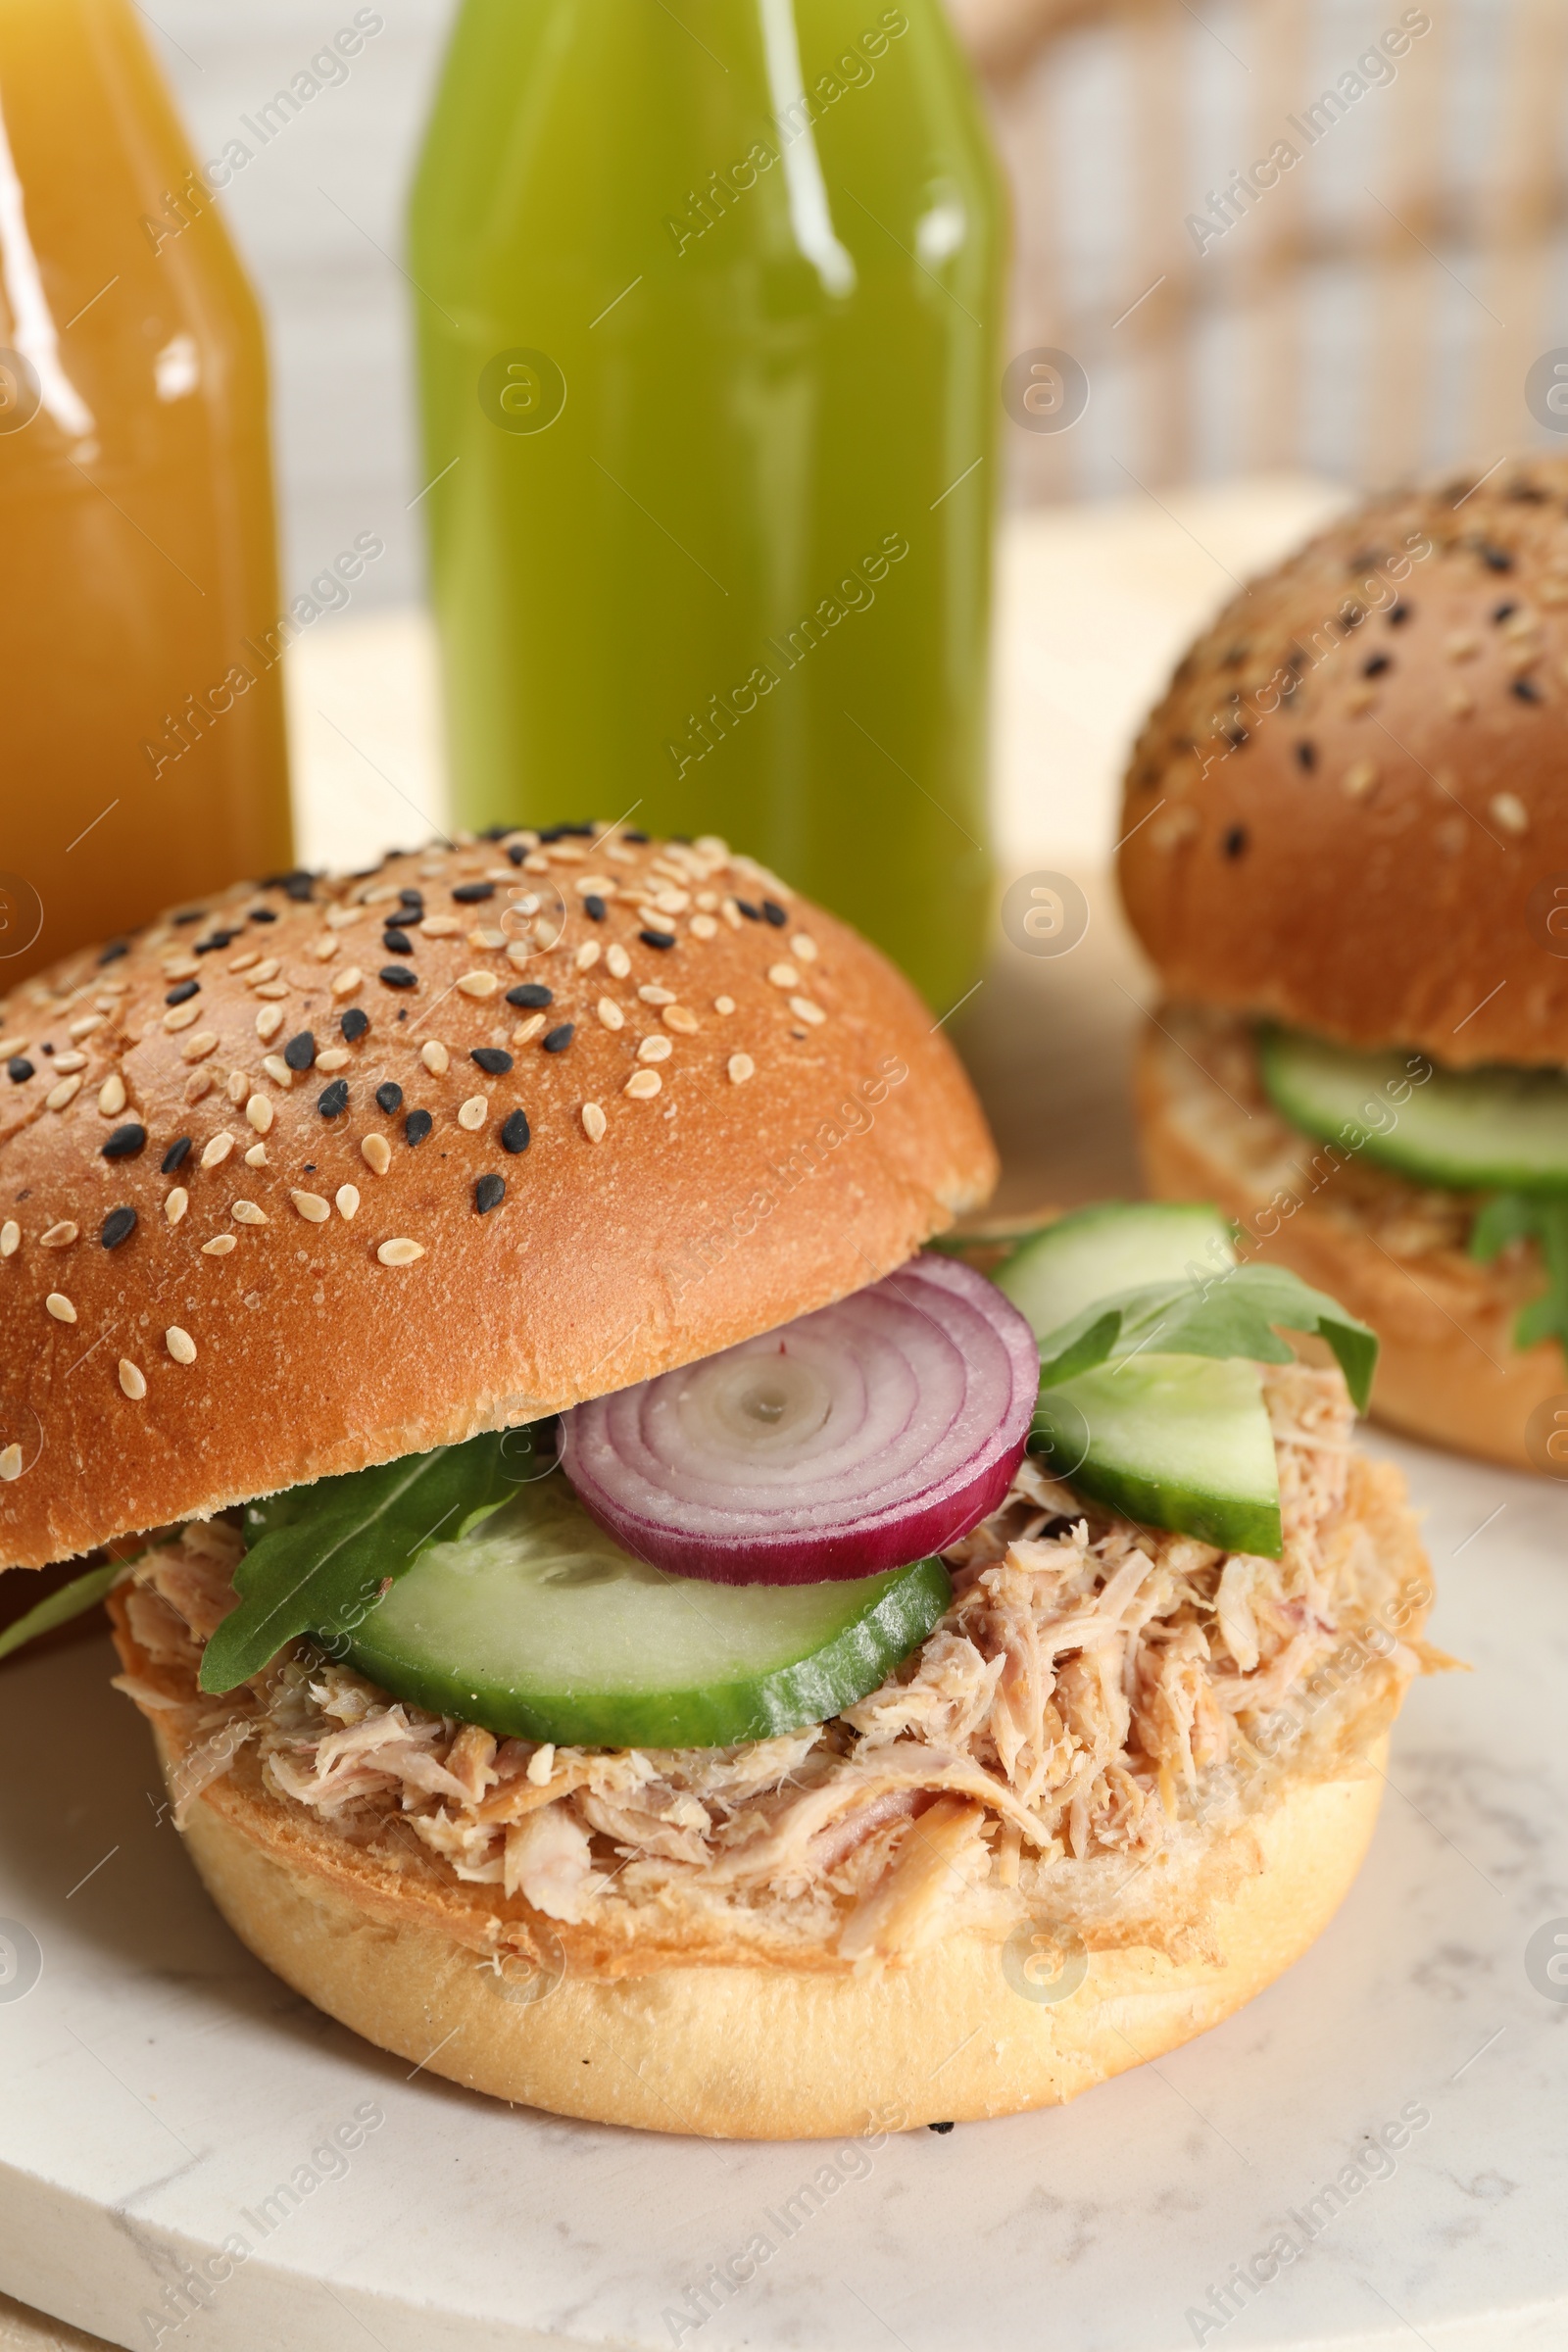 Photo of Delicious sandwiches with tuna, vegetables and bottles of juice on serving board, closeup